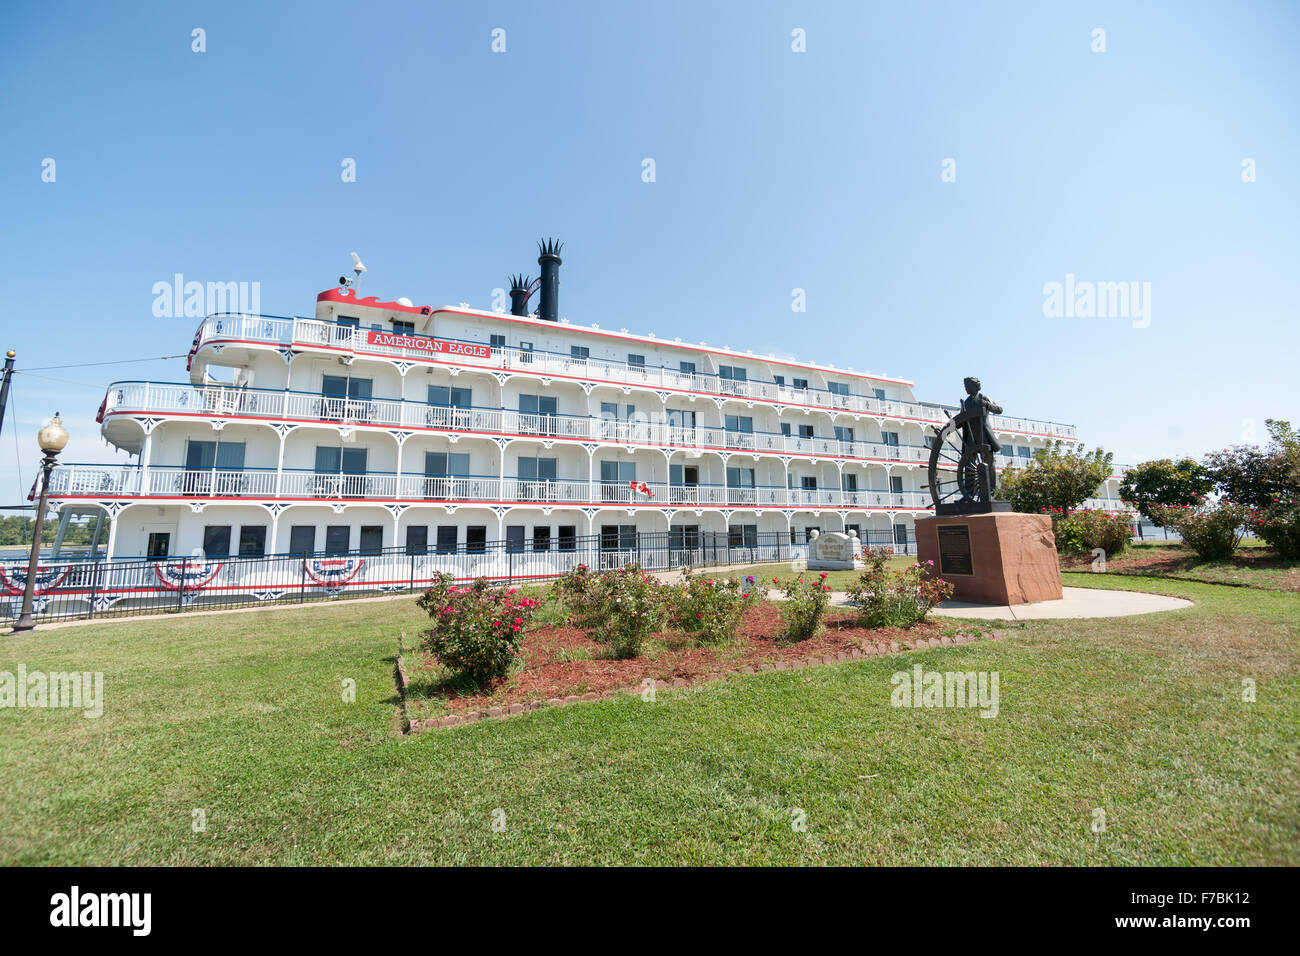 American Eagle  paddlewheel riverboat American Eagle docked by bronze statue of Mark Twain Steamboat Pilot at Hannibal Missouri Stock Photo